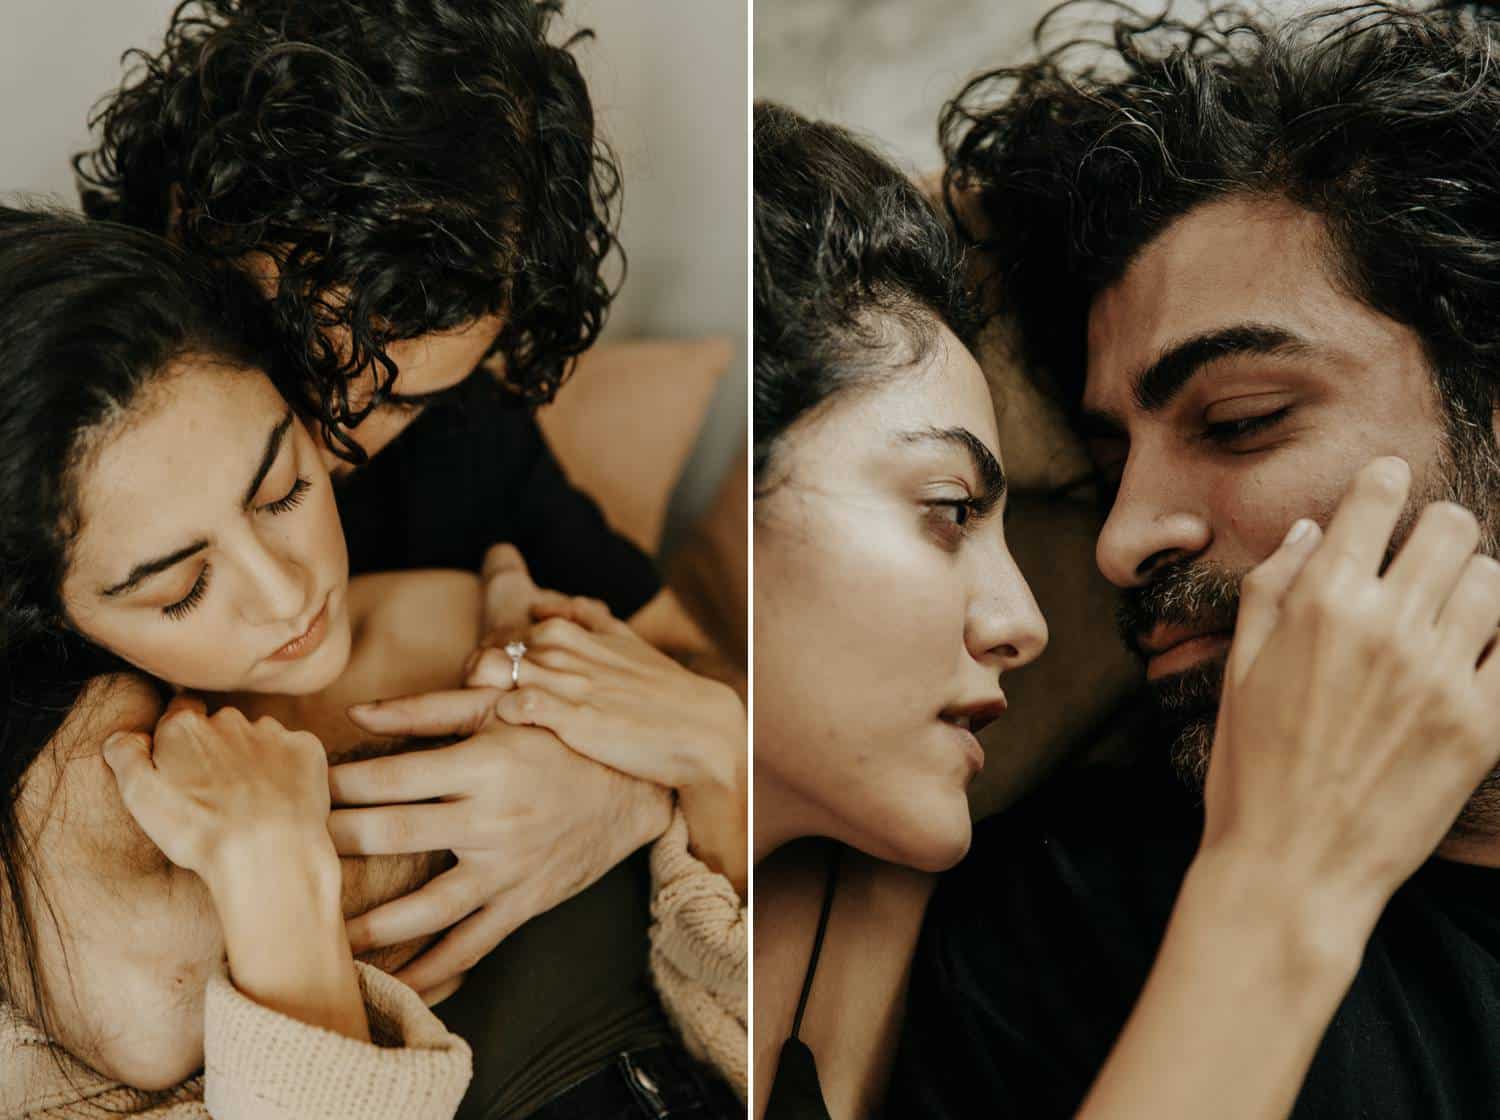 Two photos show a couple holding one another close as they lie on a bed.